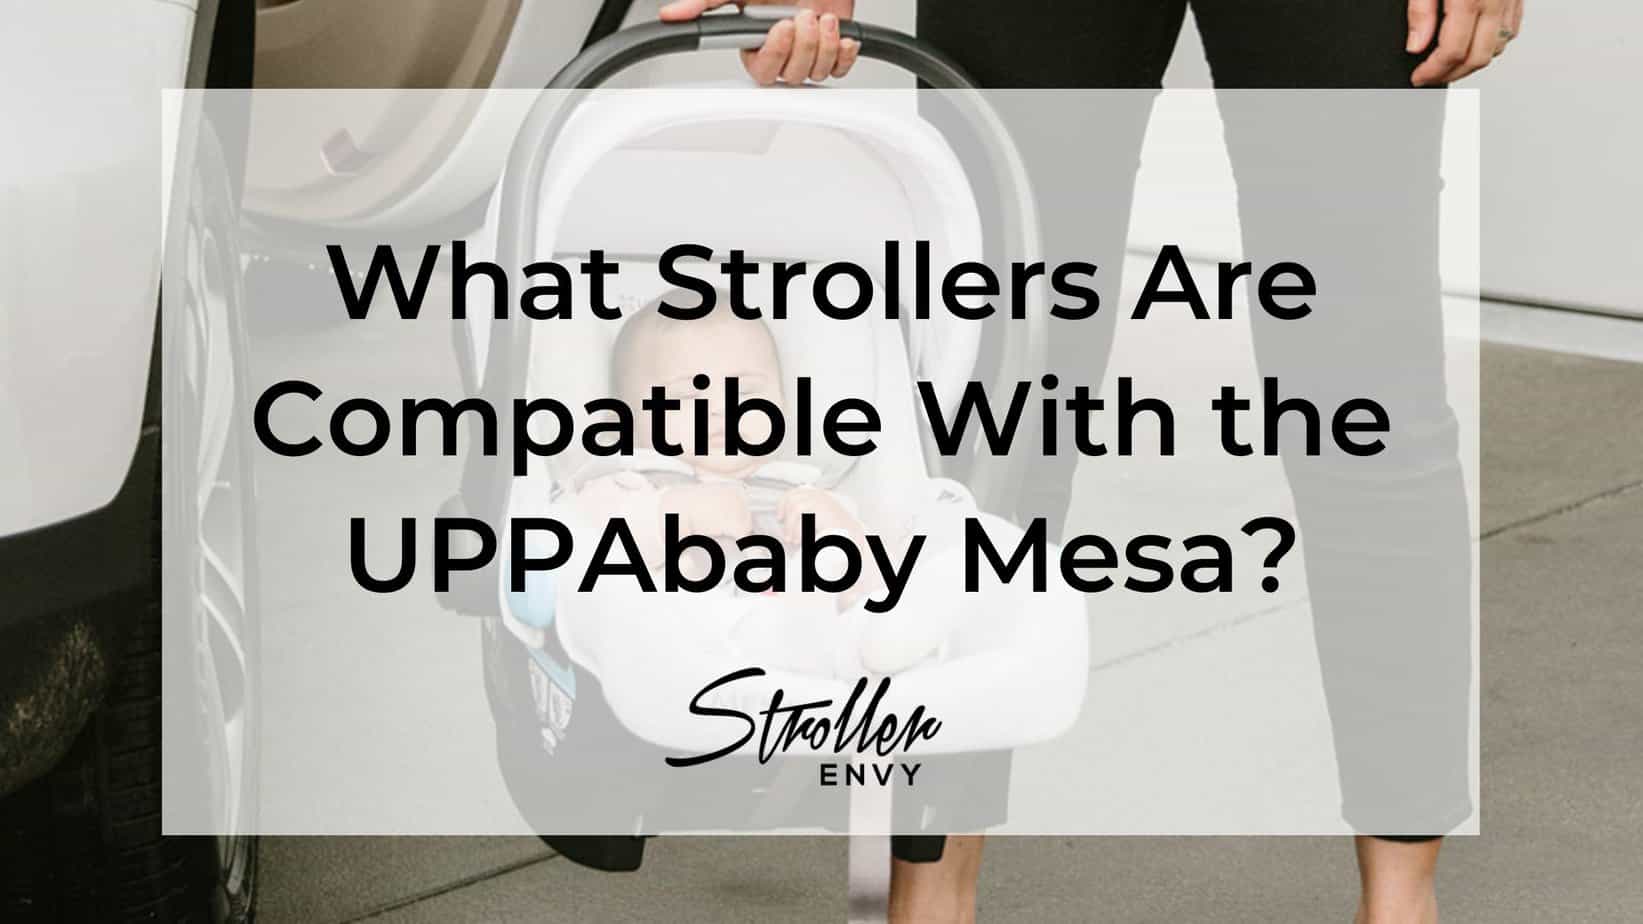 What Strollers Are Compatible With UPPAbaby Mesa